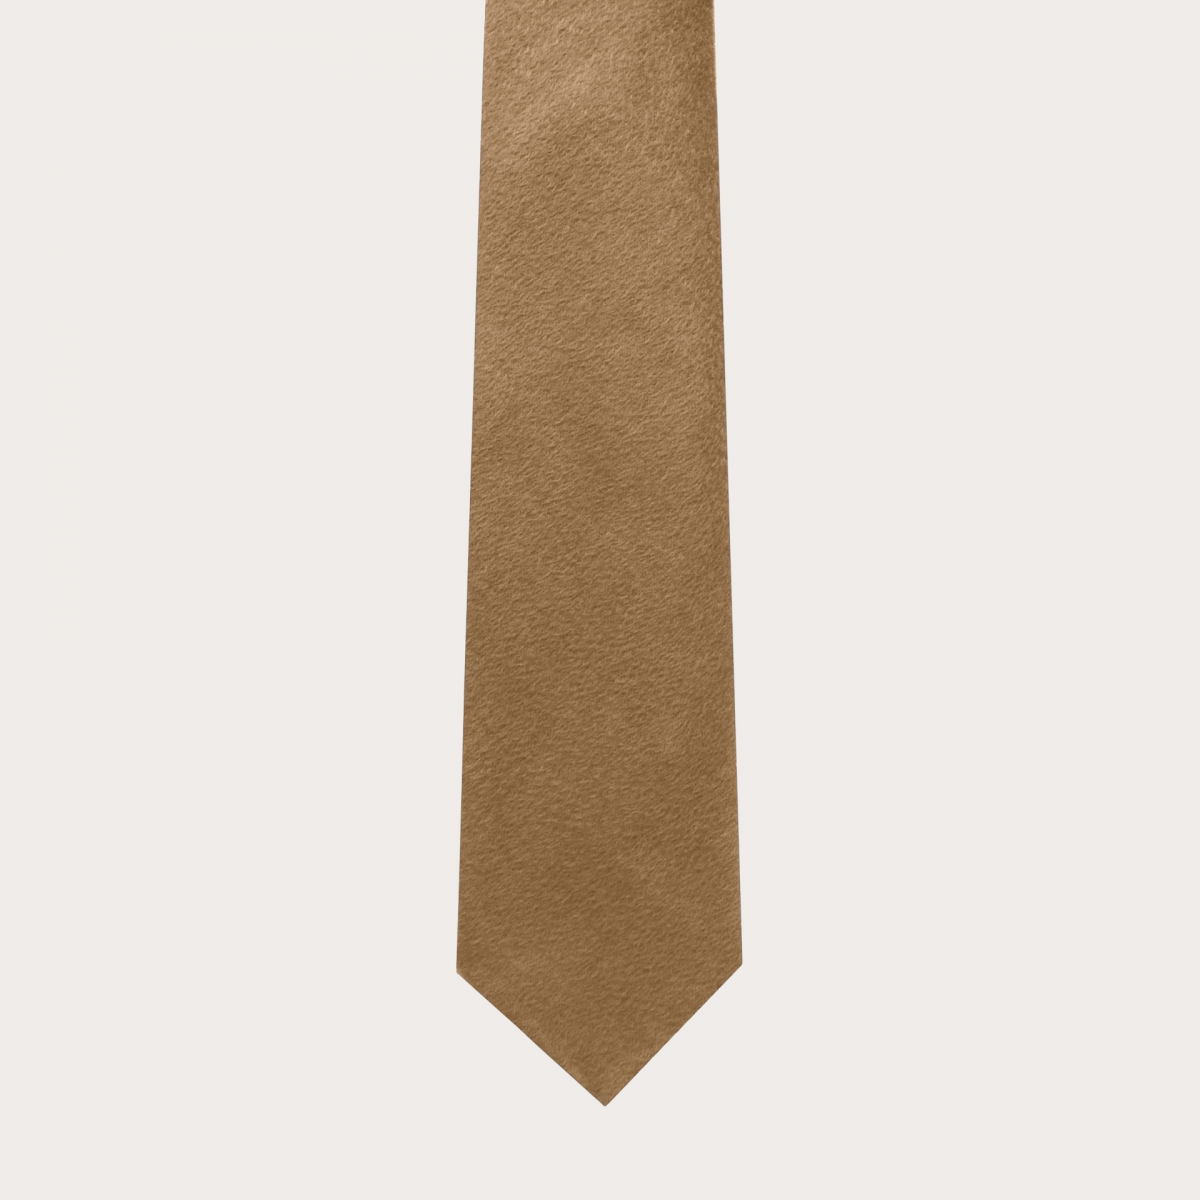 Unlined cashmere and cotton tie, beige